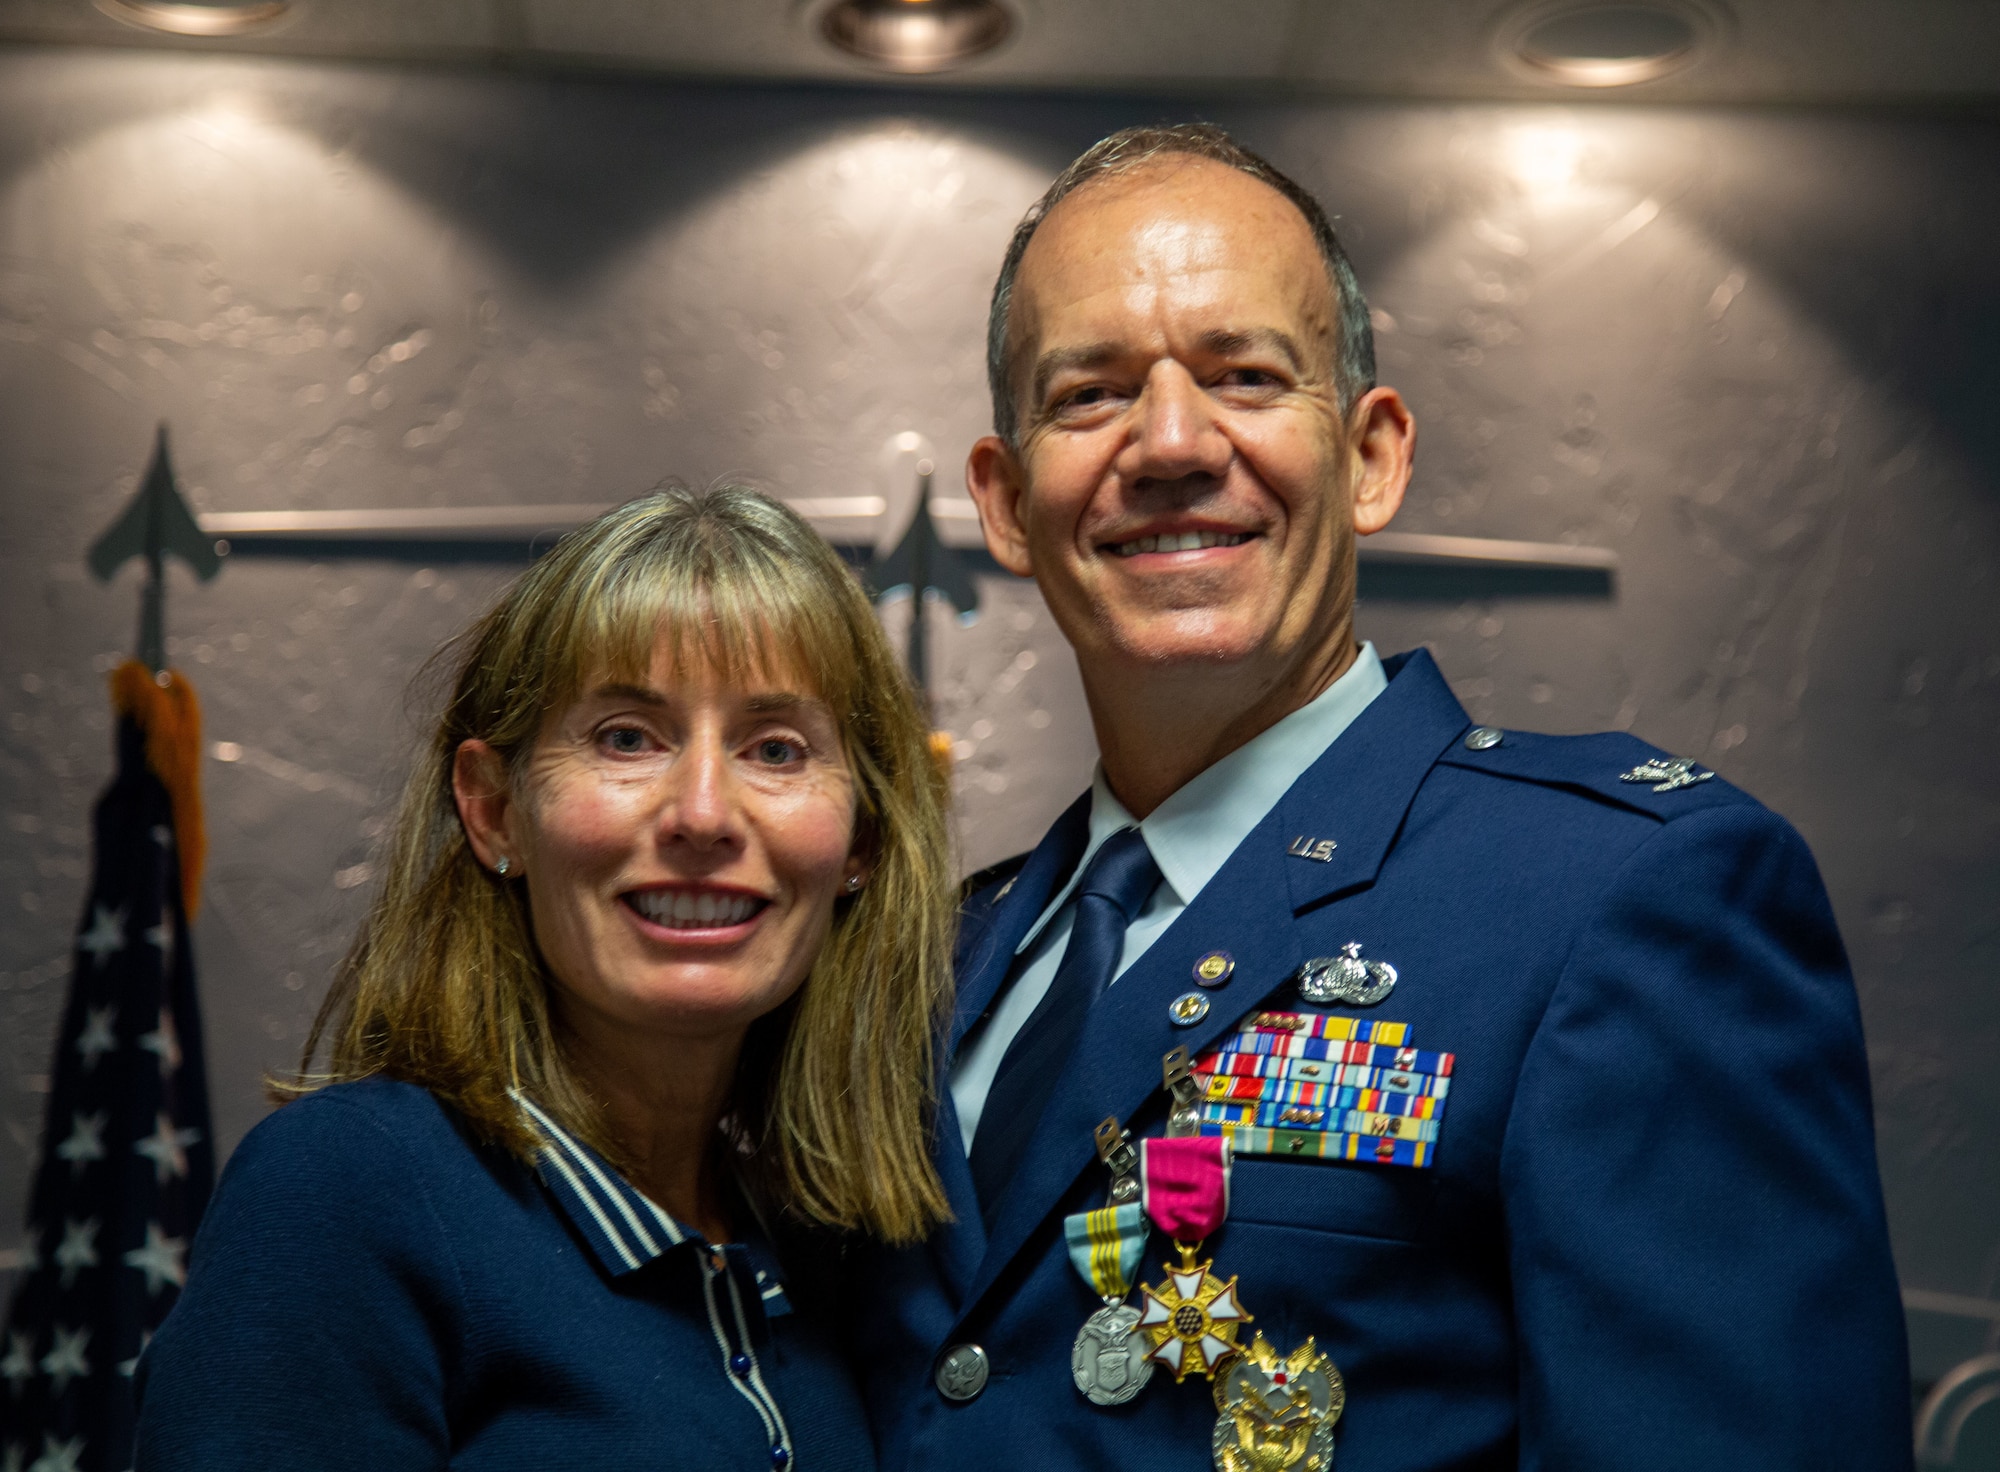 Airman and woman pose for photo.